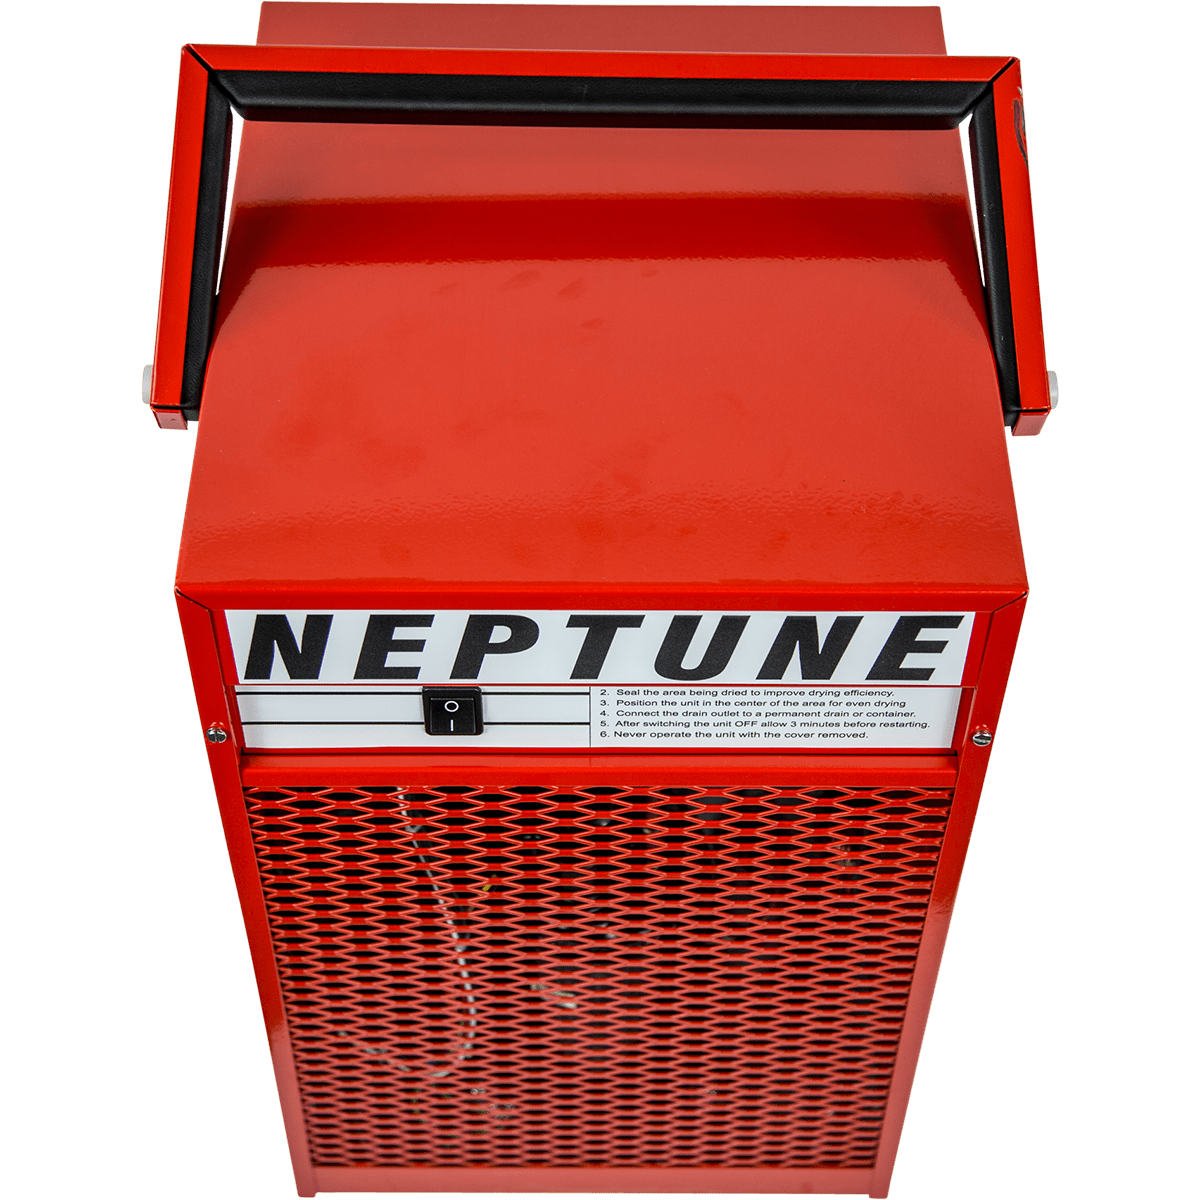 Restoration 10199GR-US Neptune Industrial Portable Dehumidifier for Cleaning 